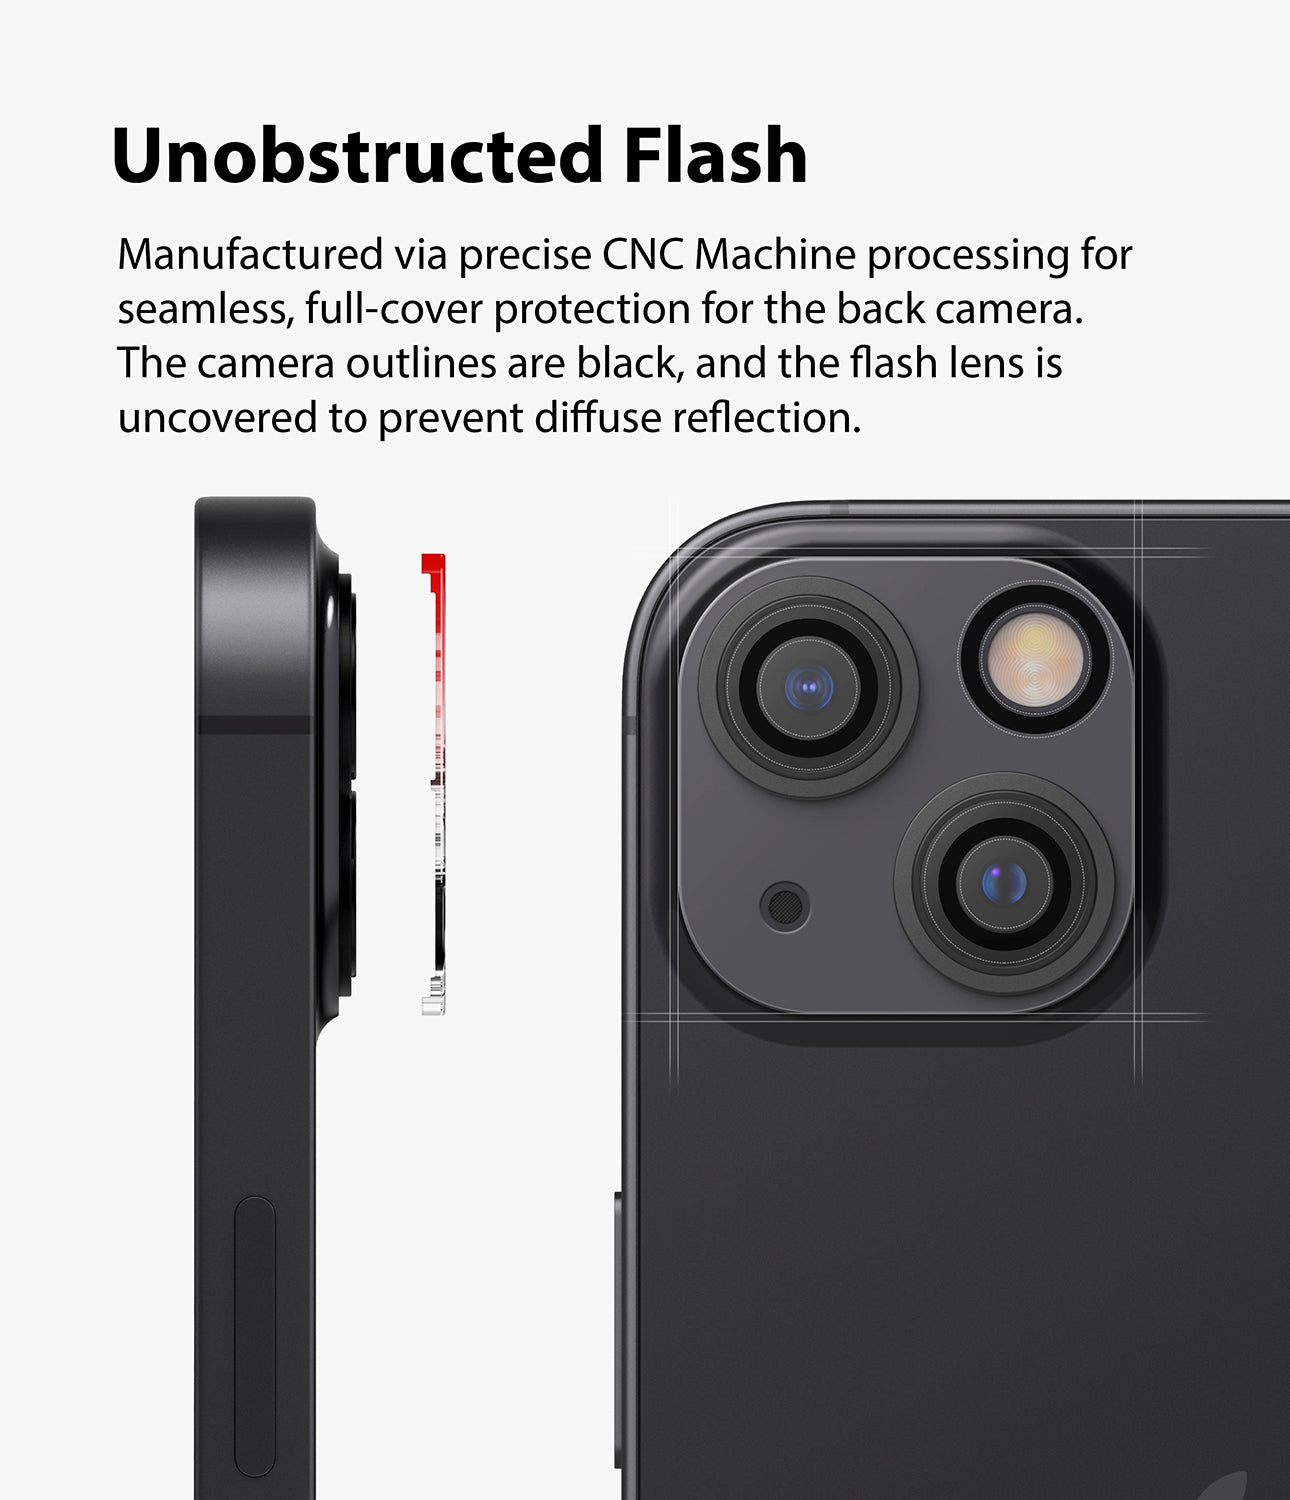 Unobstructed flash